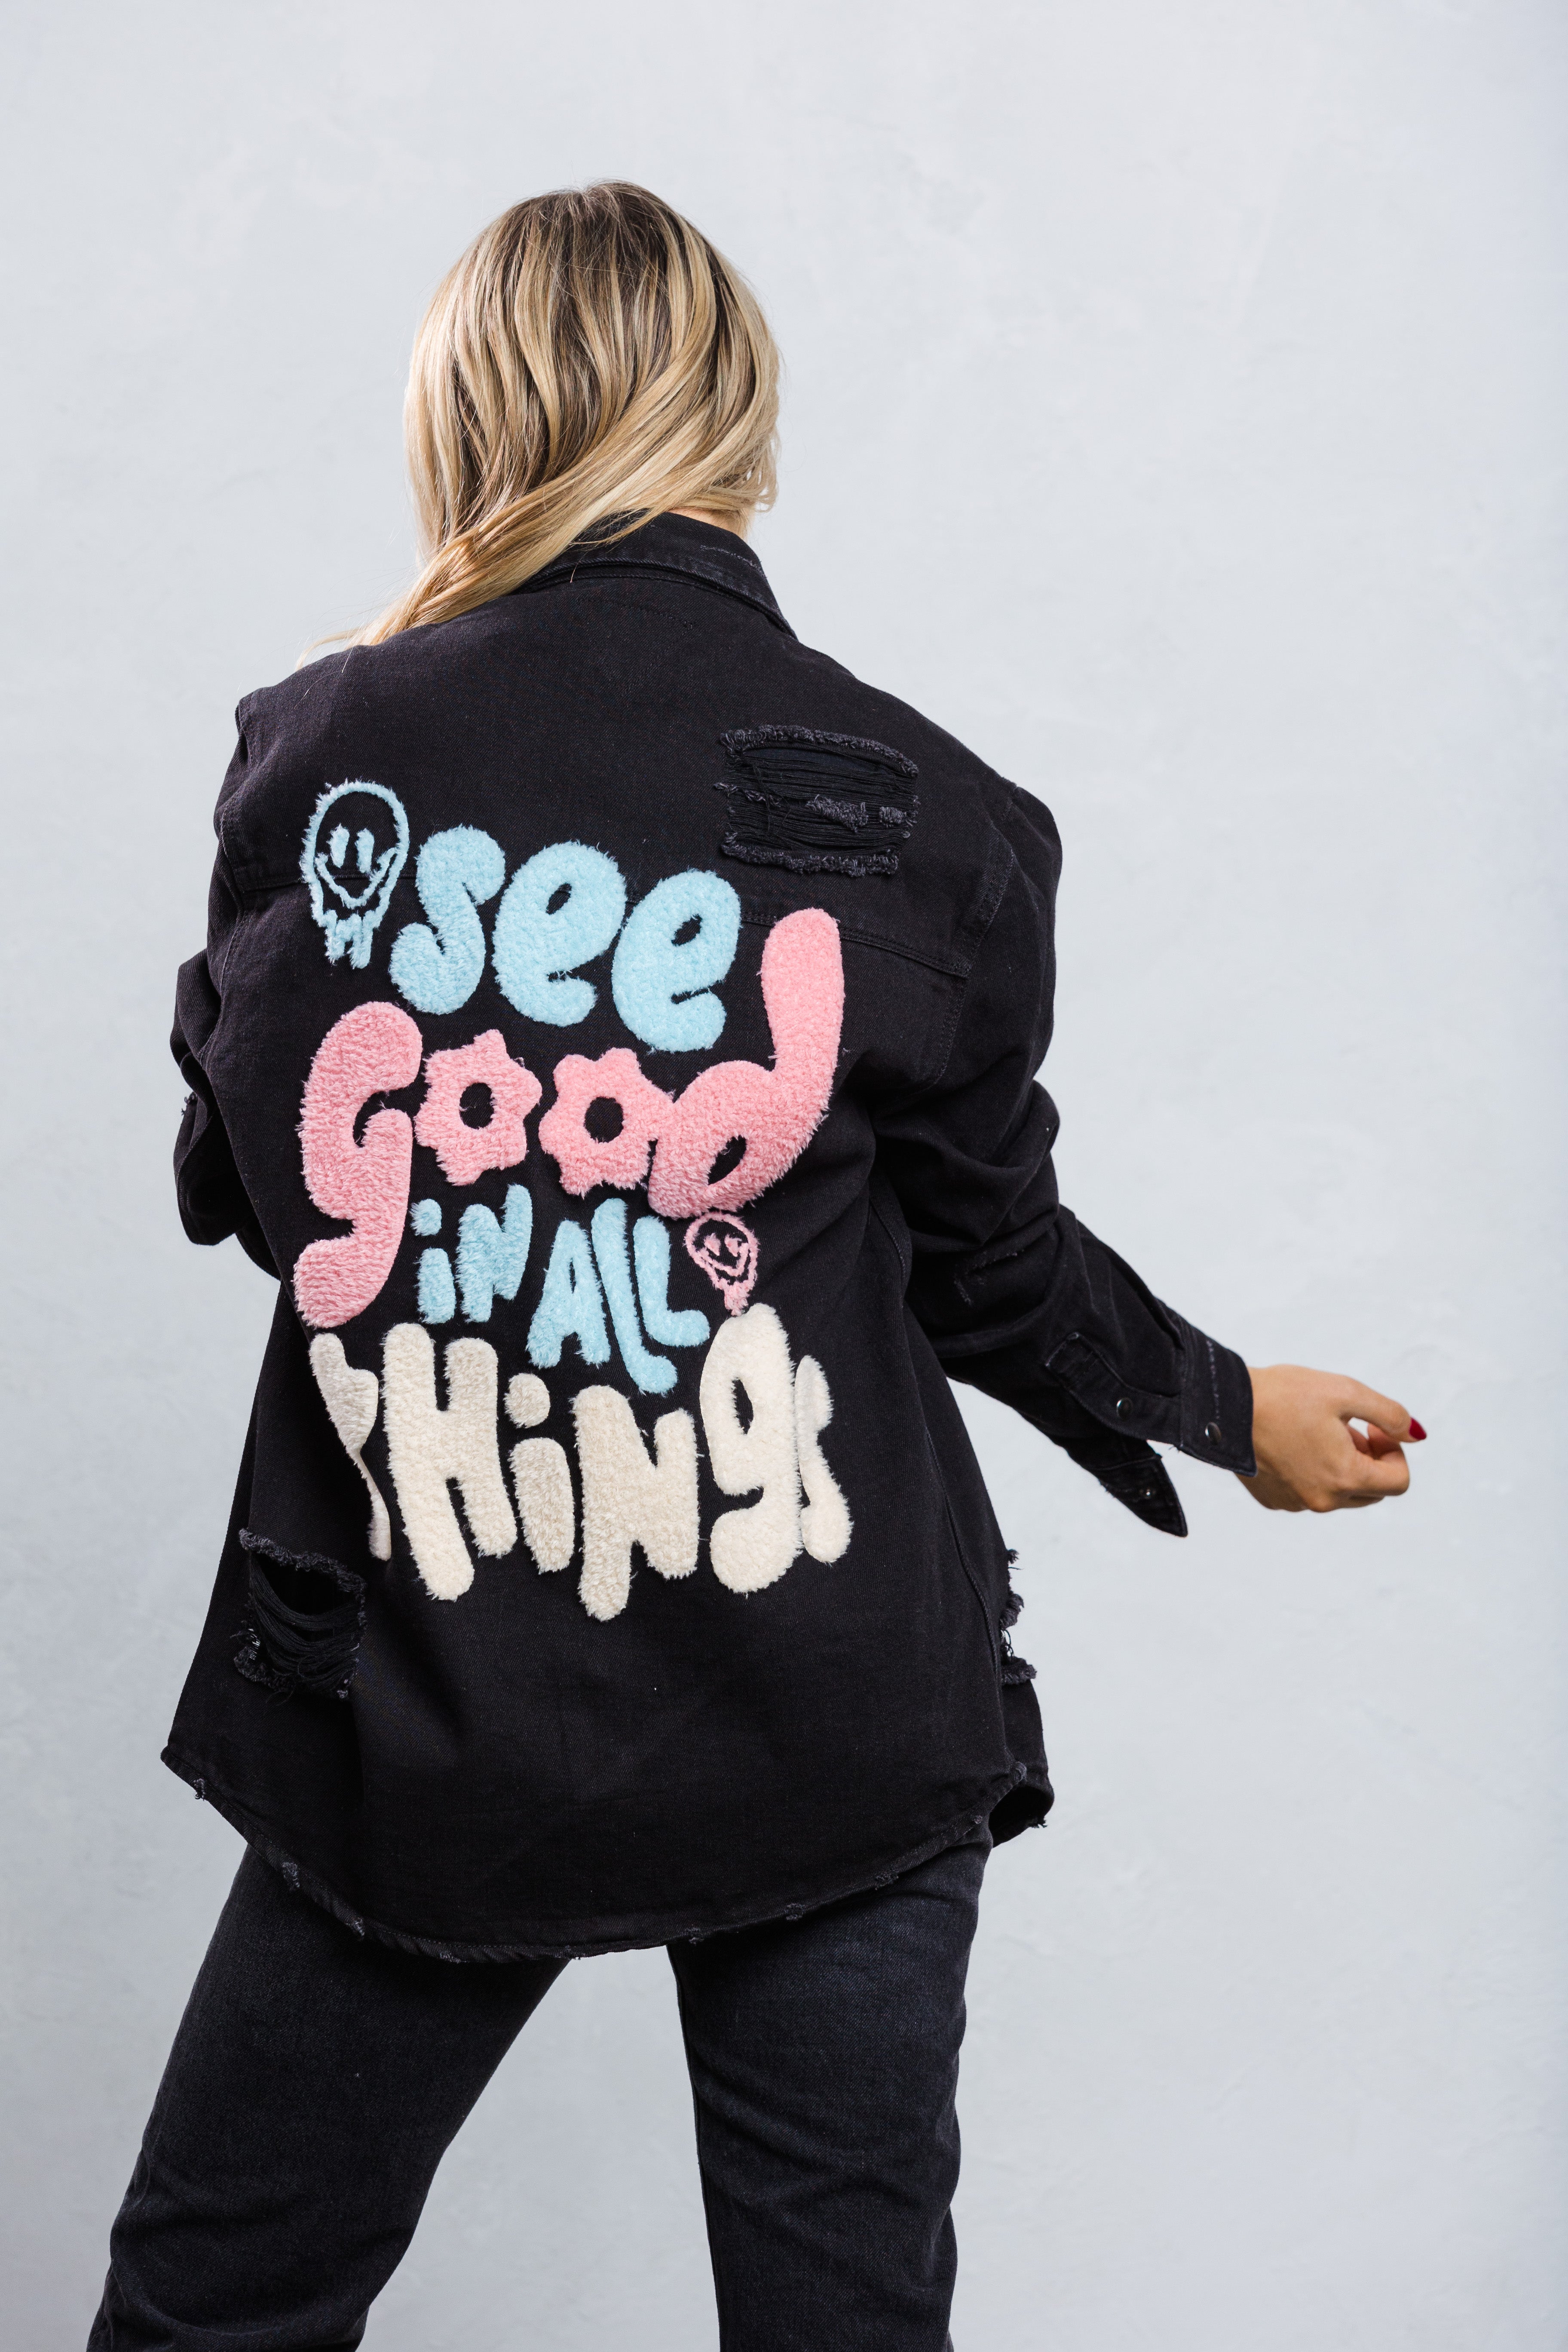 SEE GOOD IN ALL THINGS Shirt Jacket